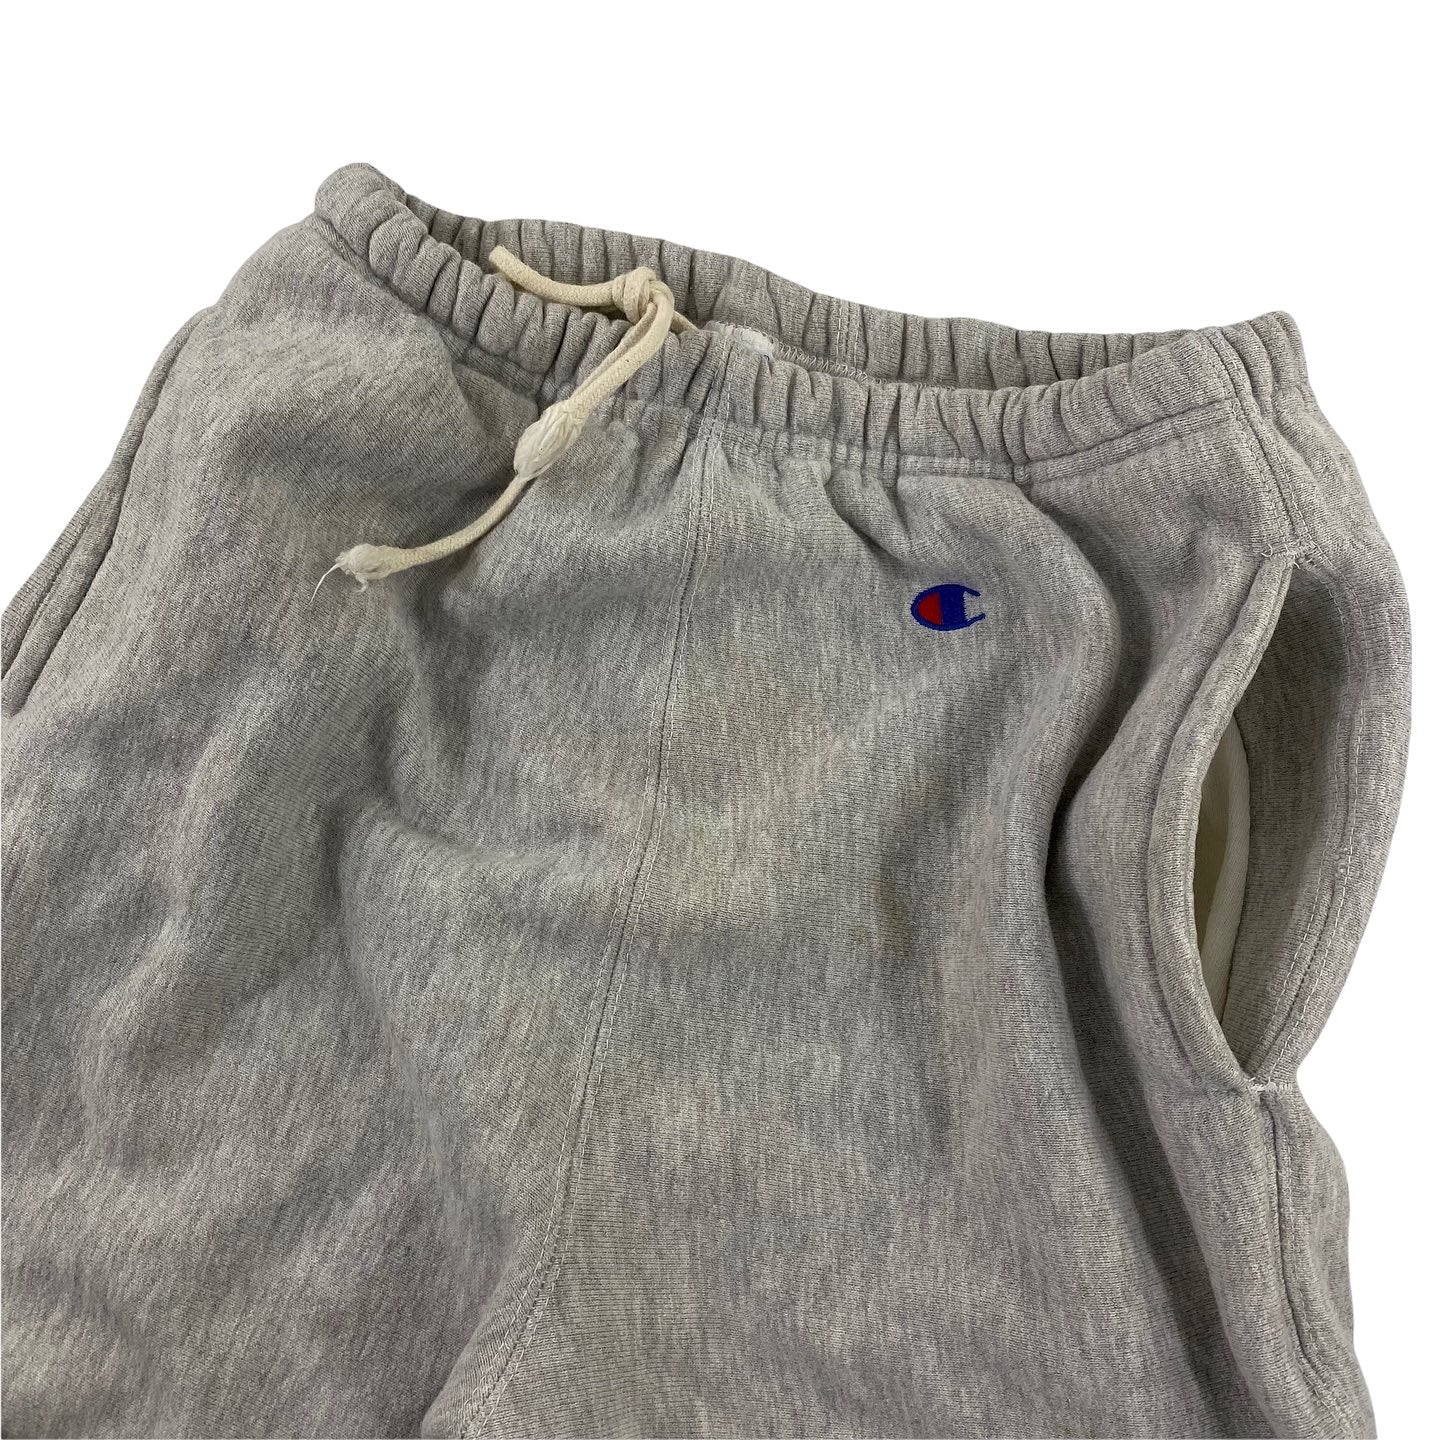 Champion reverse weave sweatpants. pockets. Made in usa